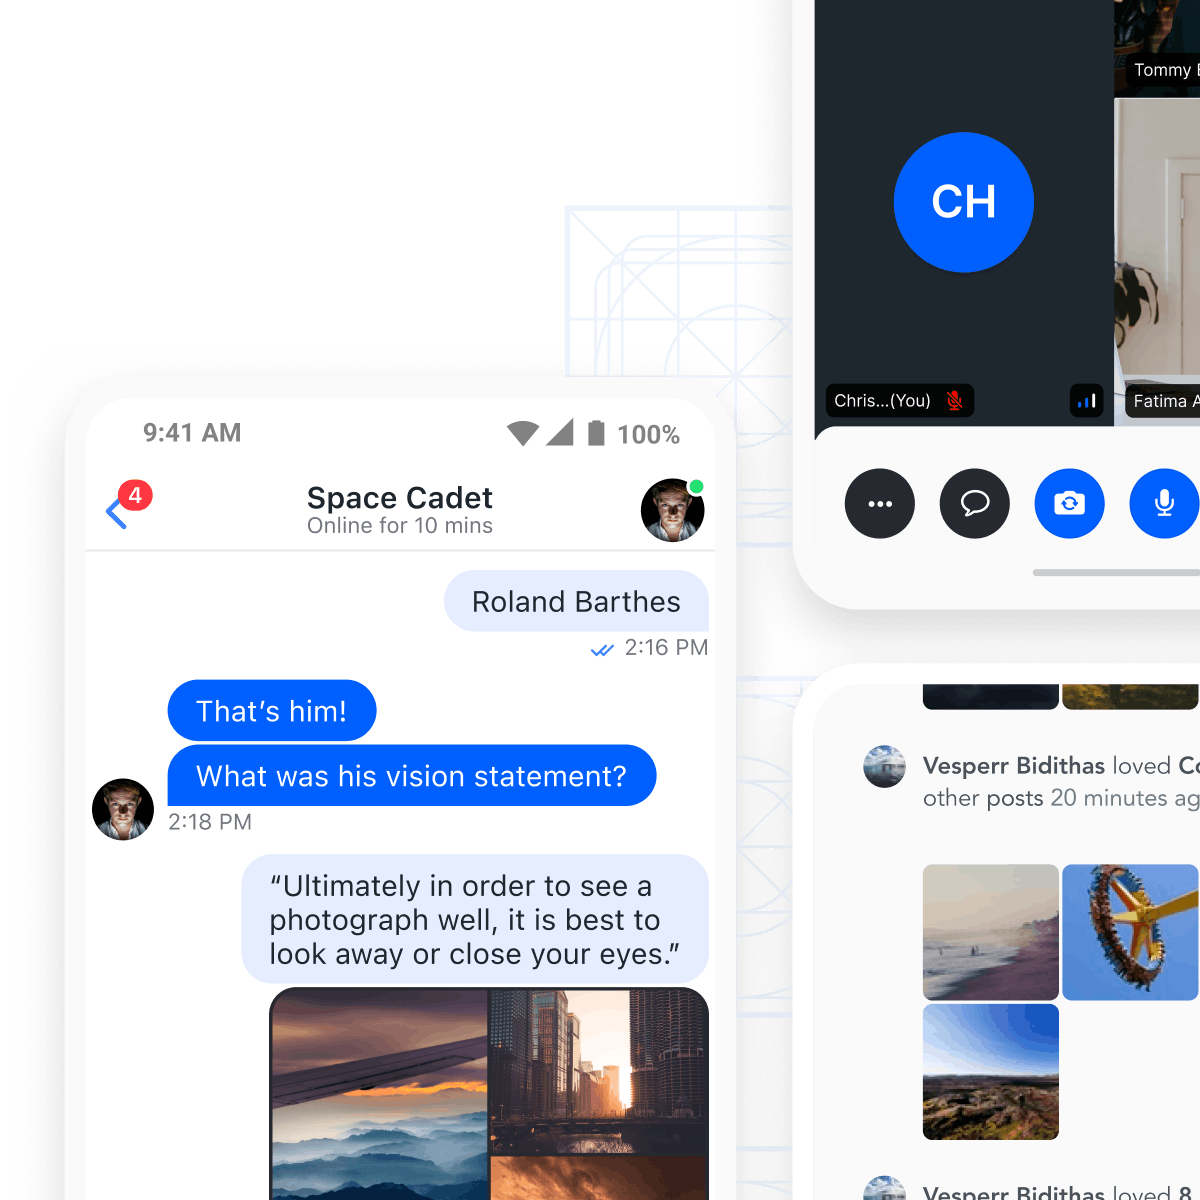 example of chat messaging, video and audio, and activity feeds mockups using light theme